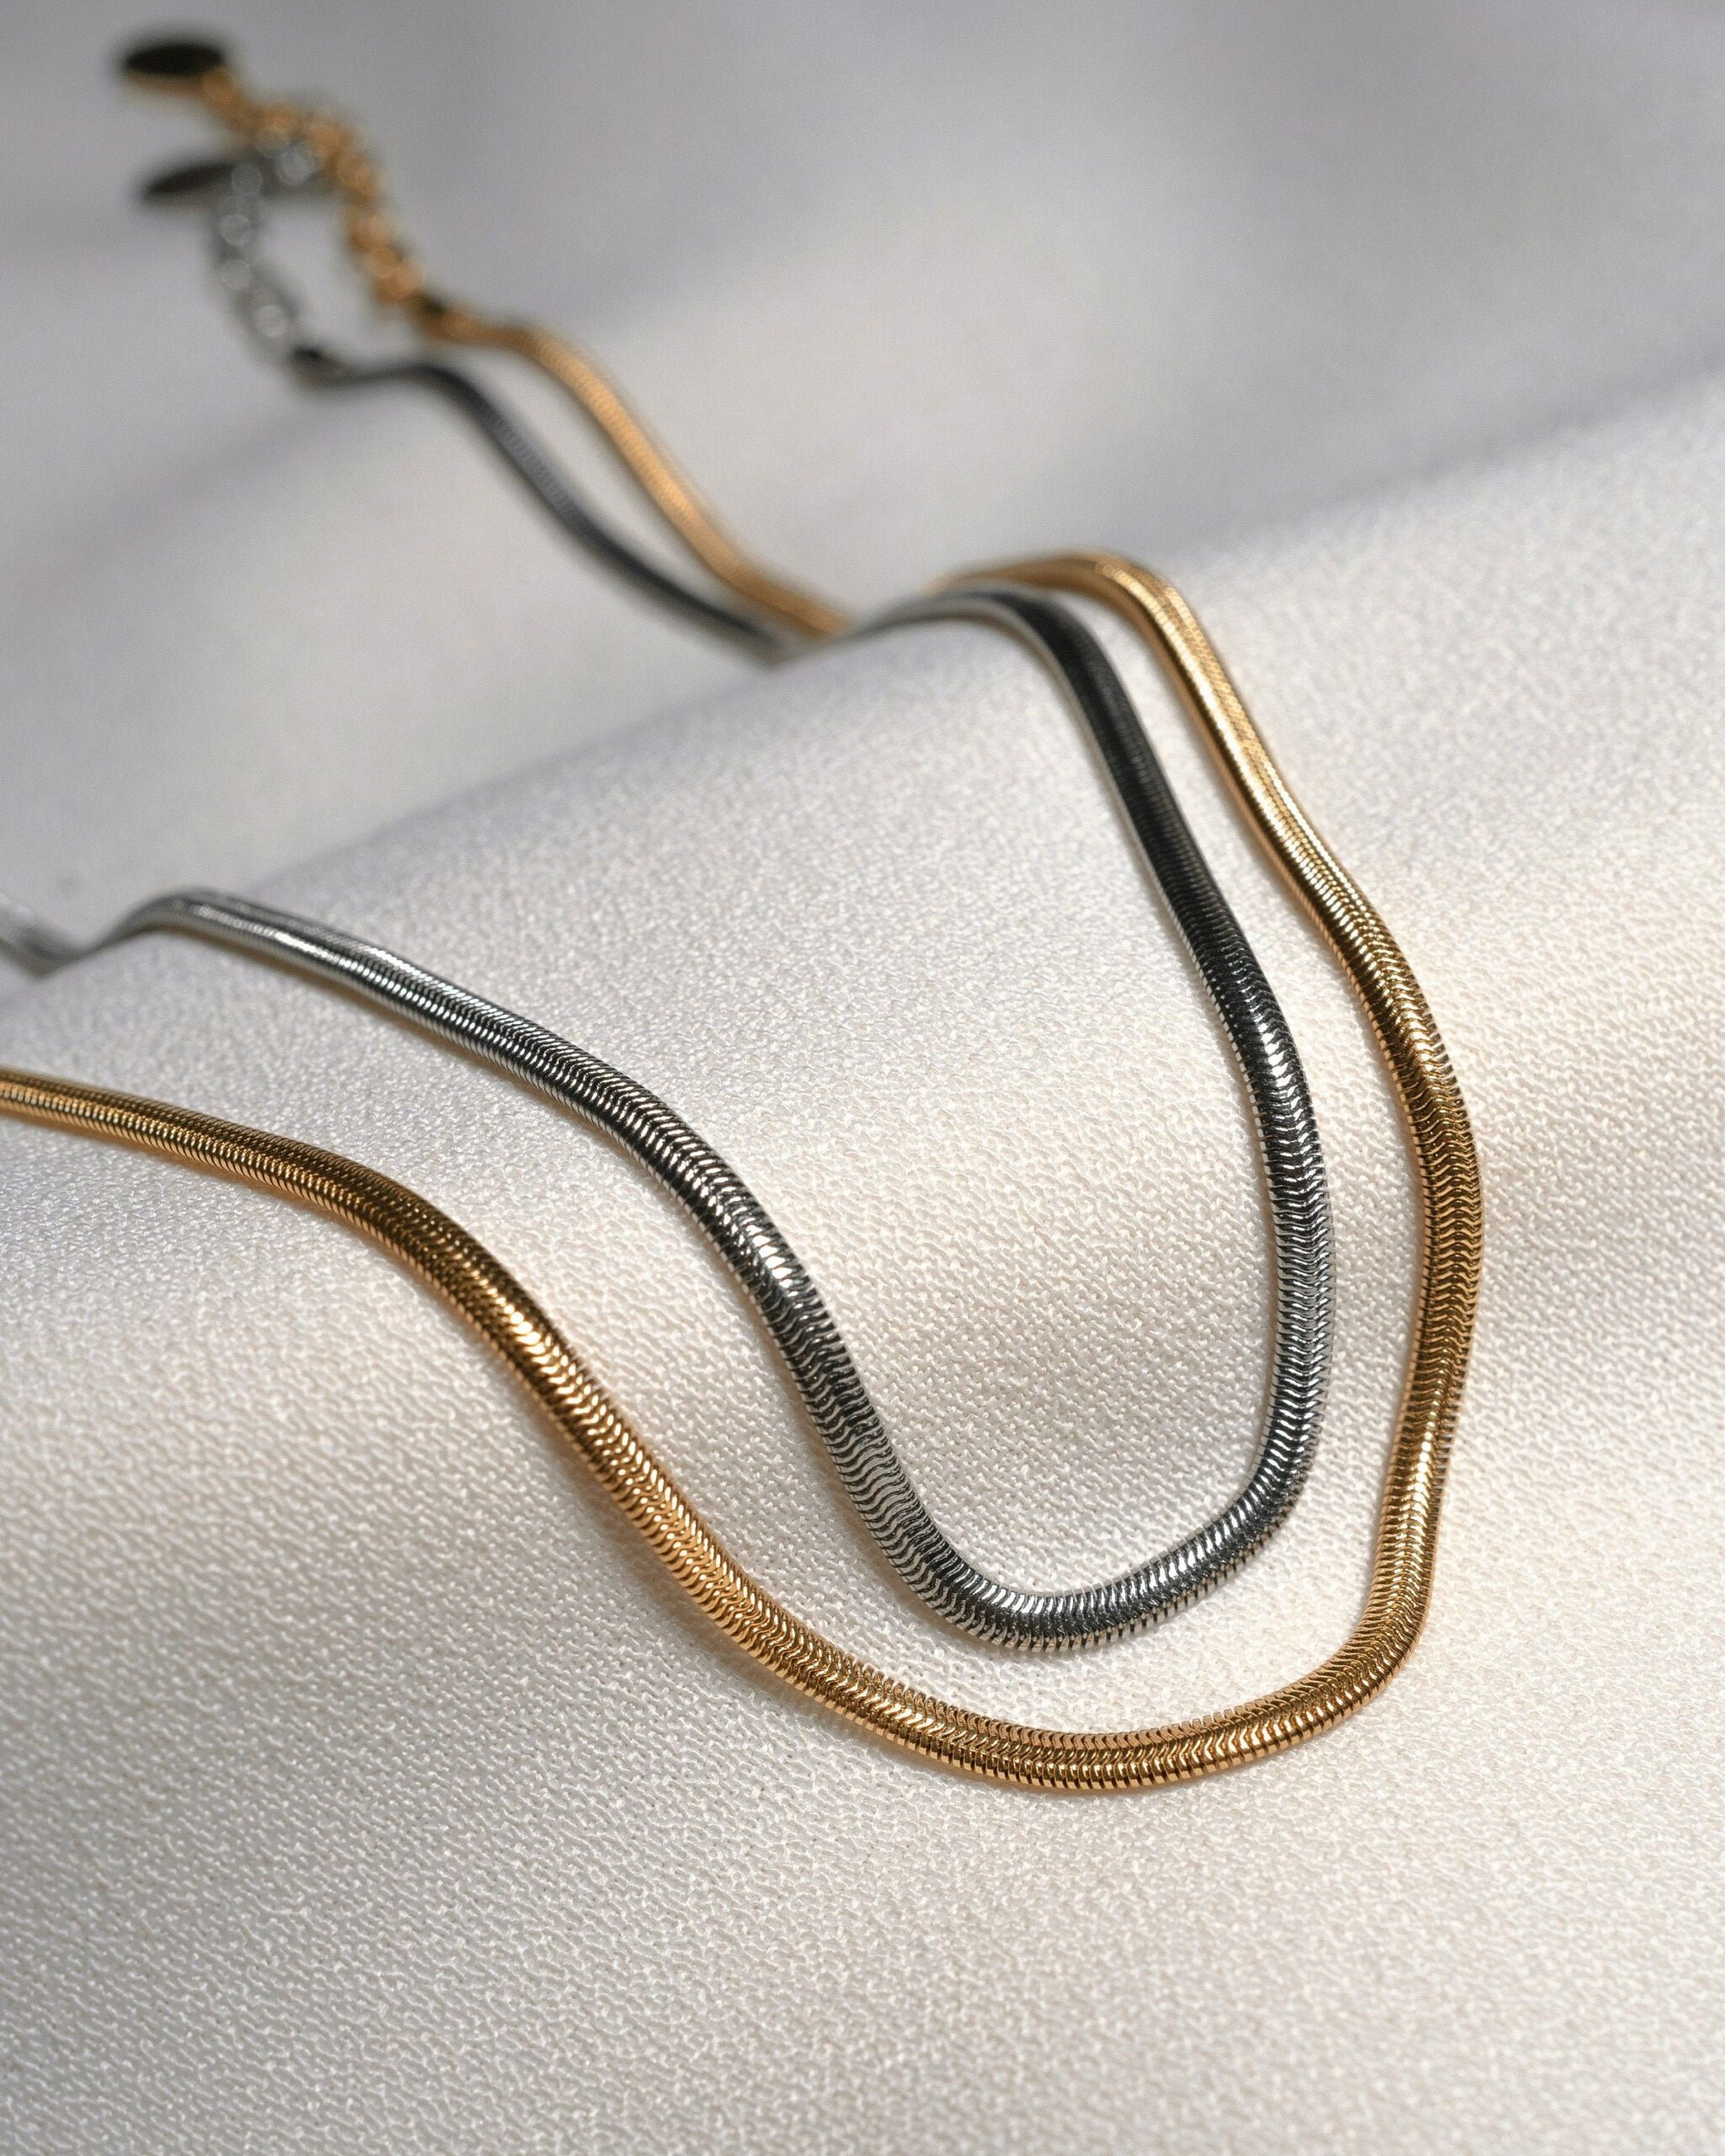 Masculine Magnificence: Silver Chains for Men’s Fashion Forwardness